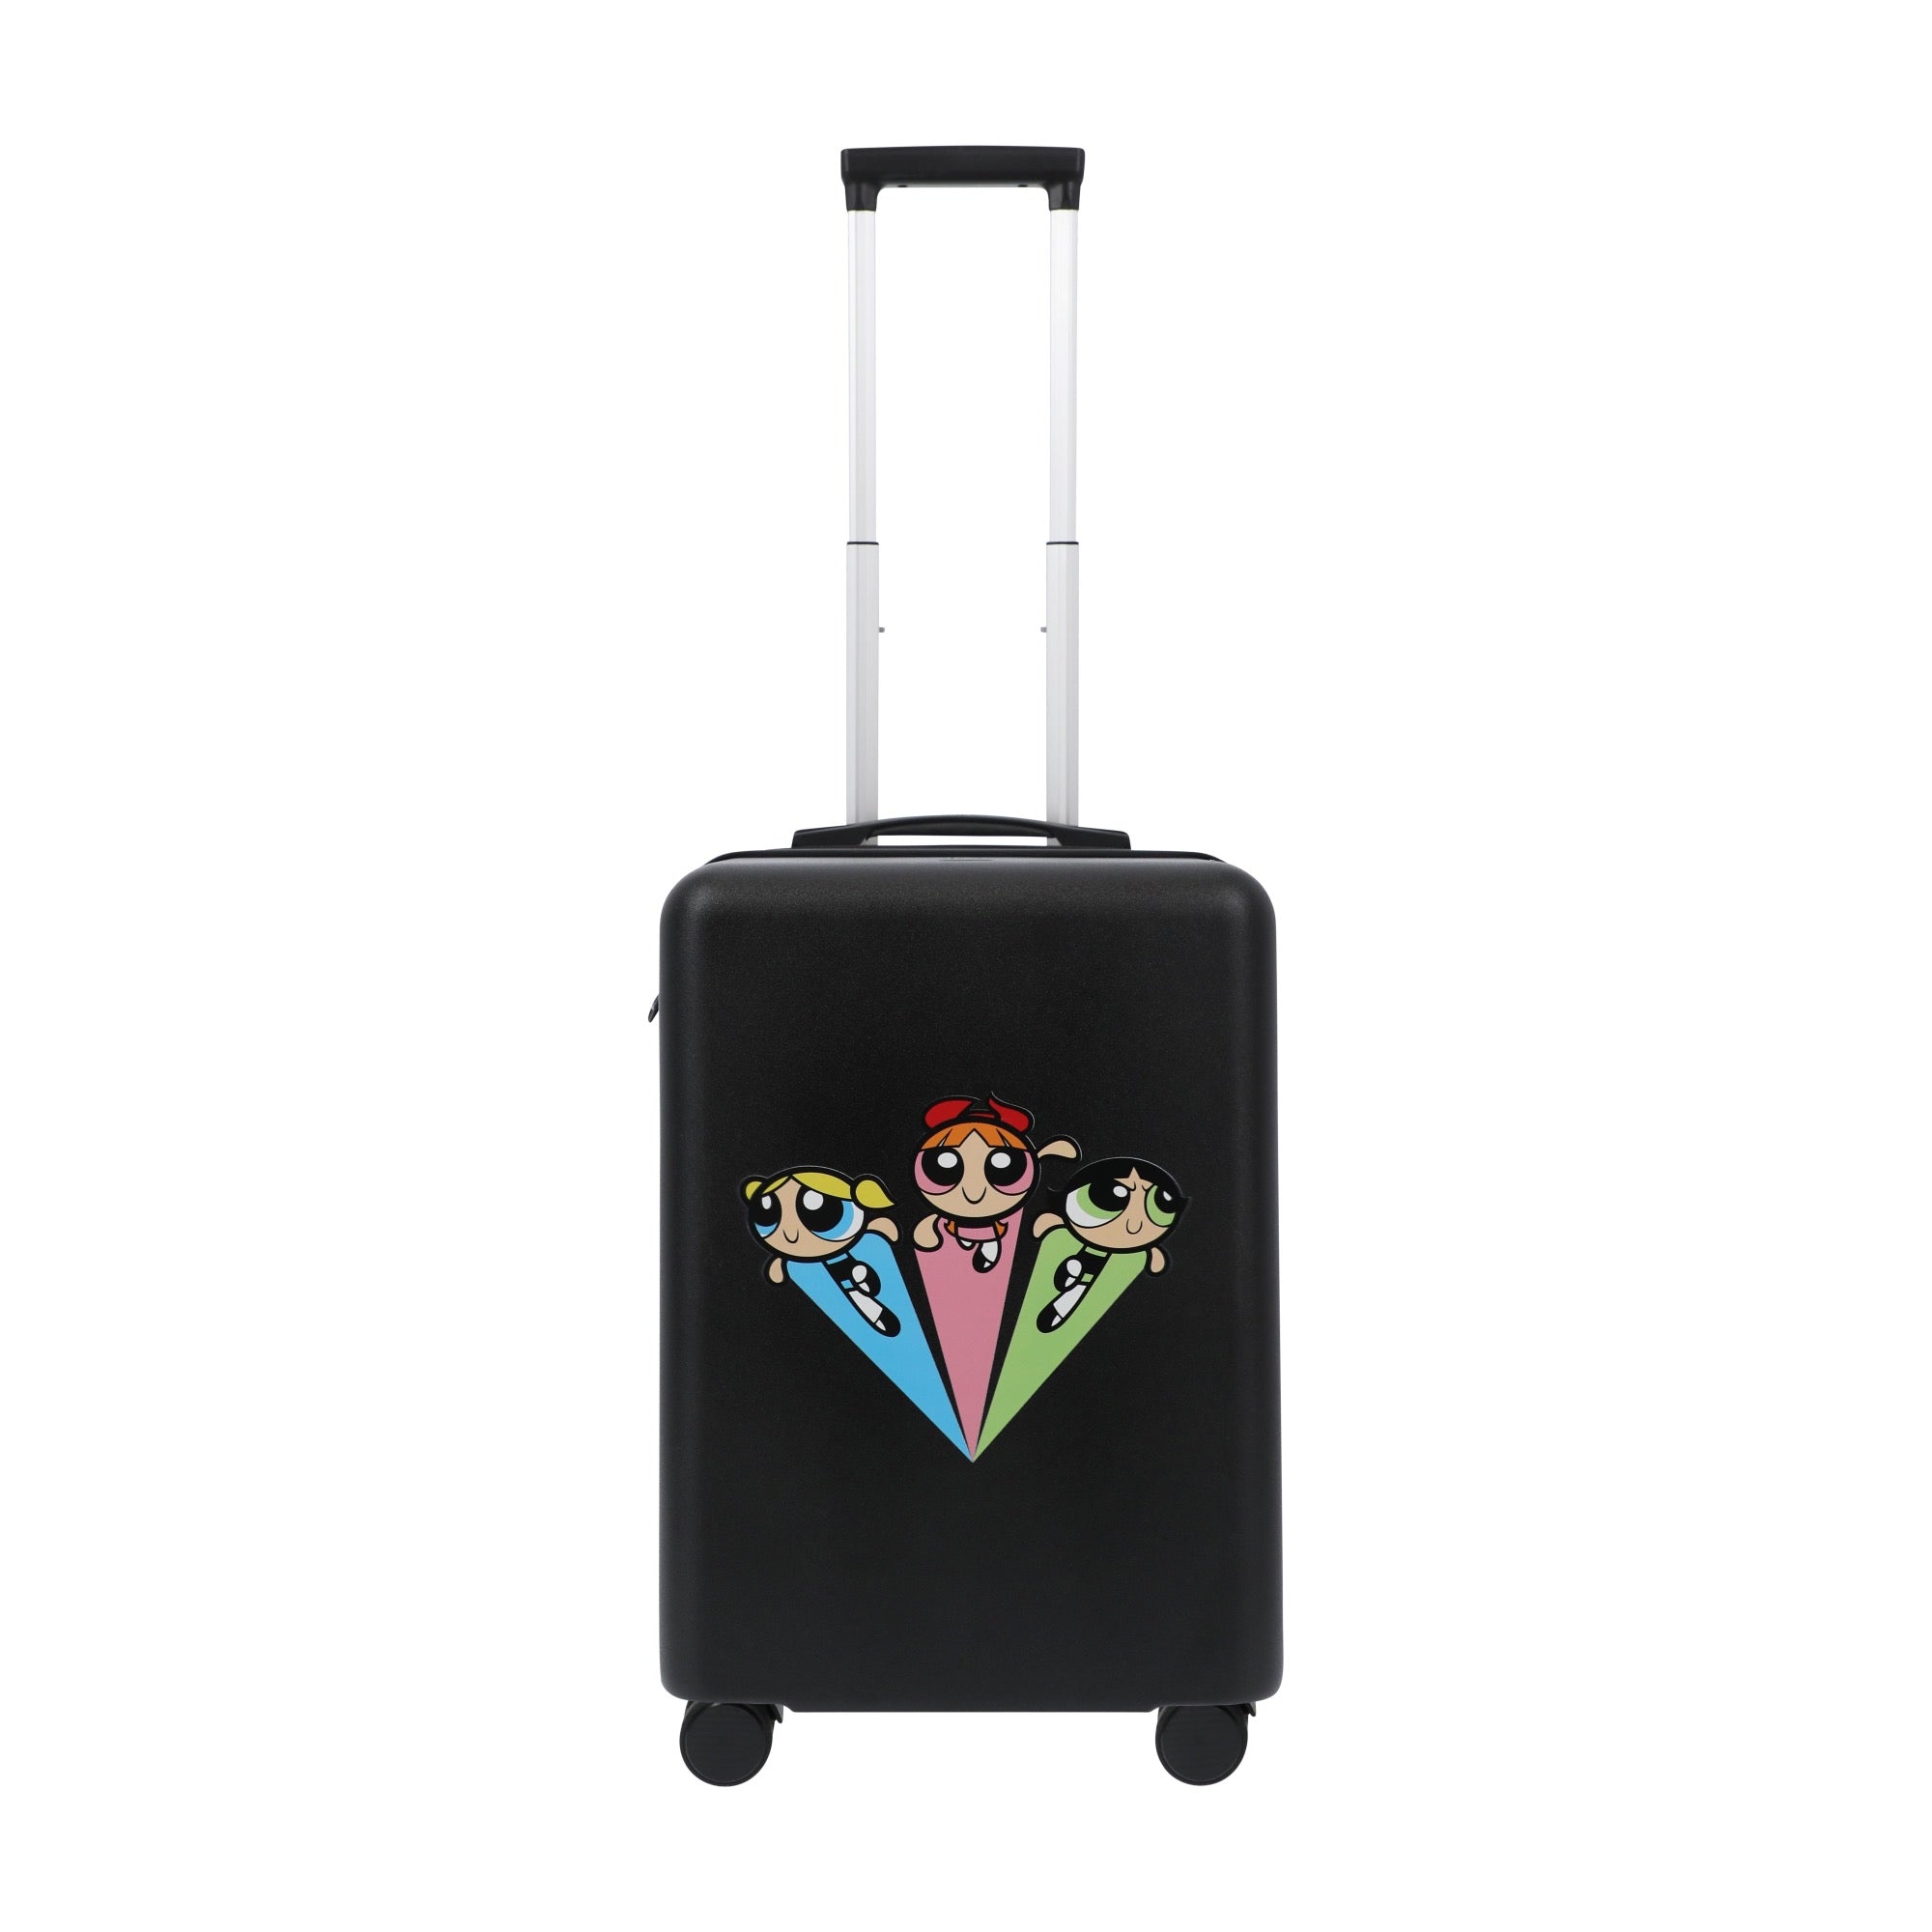 Black WB powerpuff girls 22.5" carry-on spinner suitcase luggage by Ful